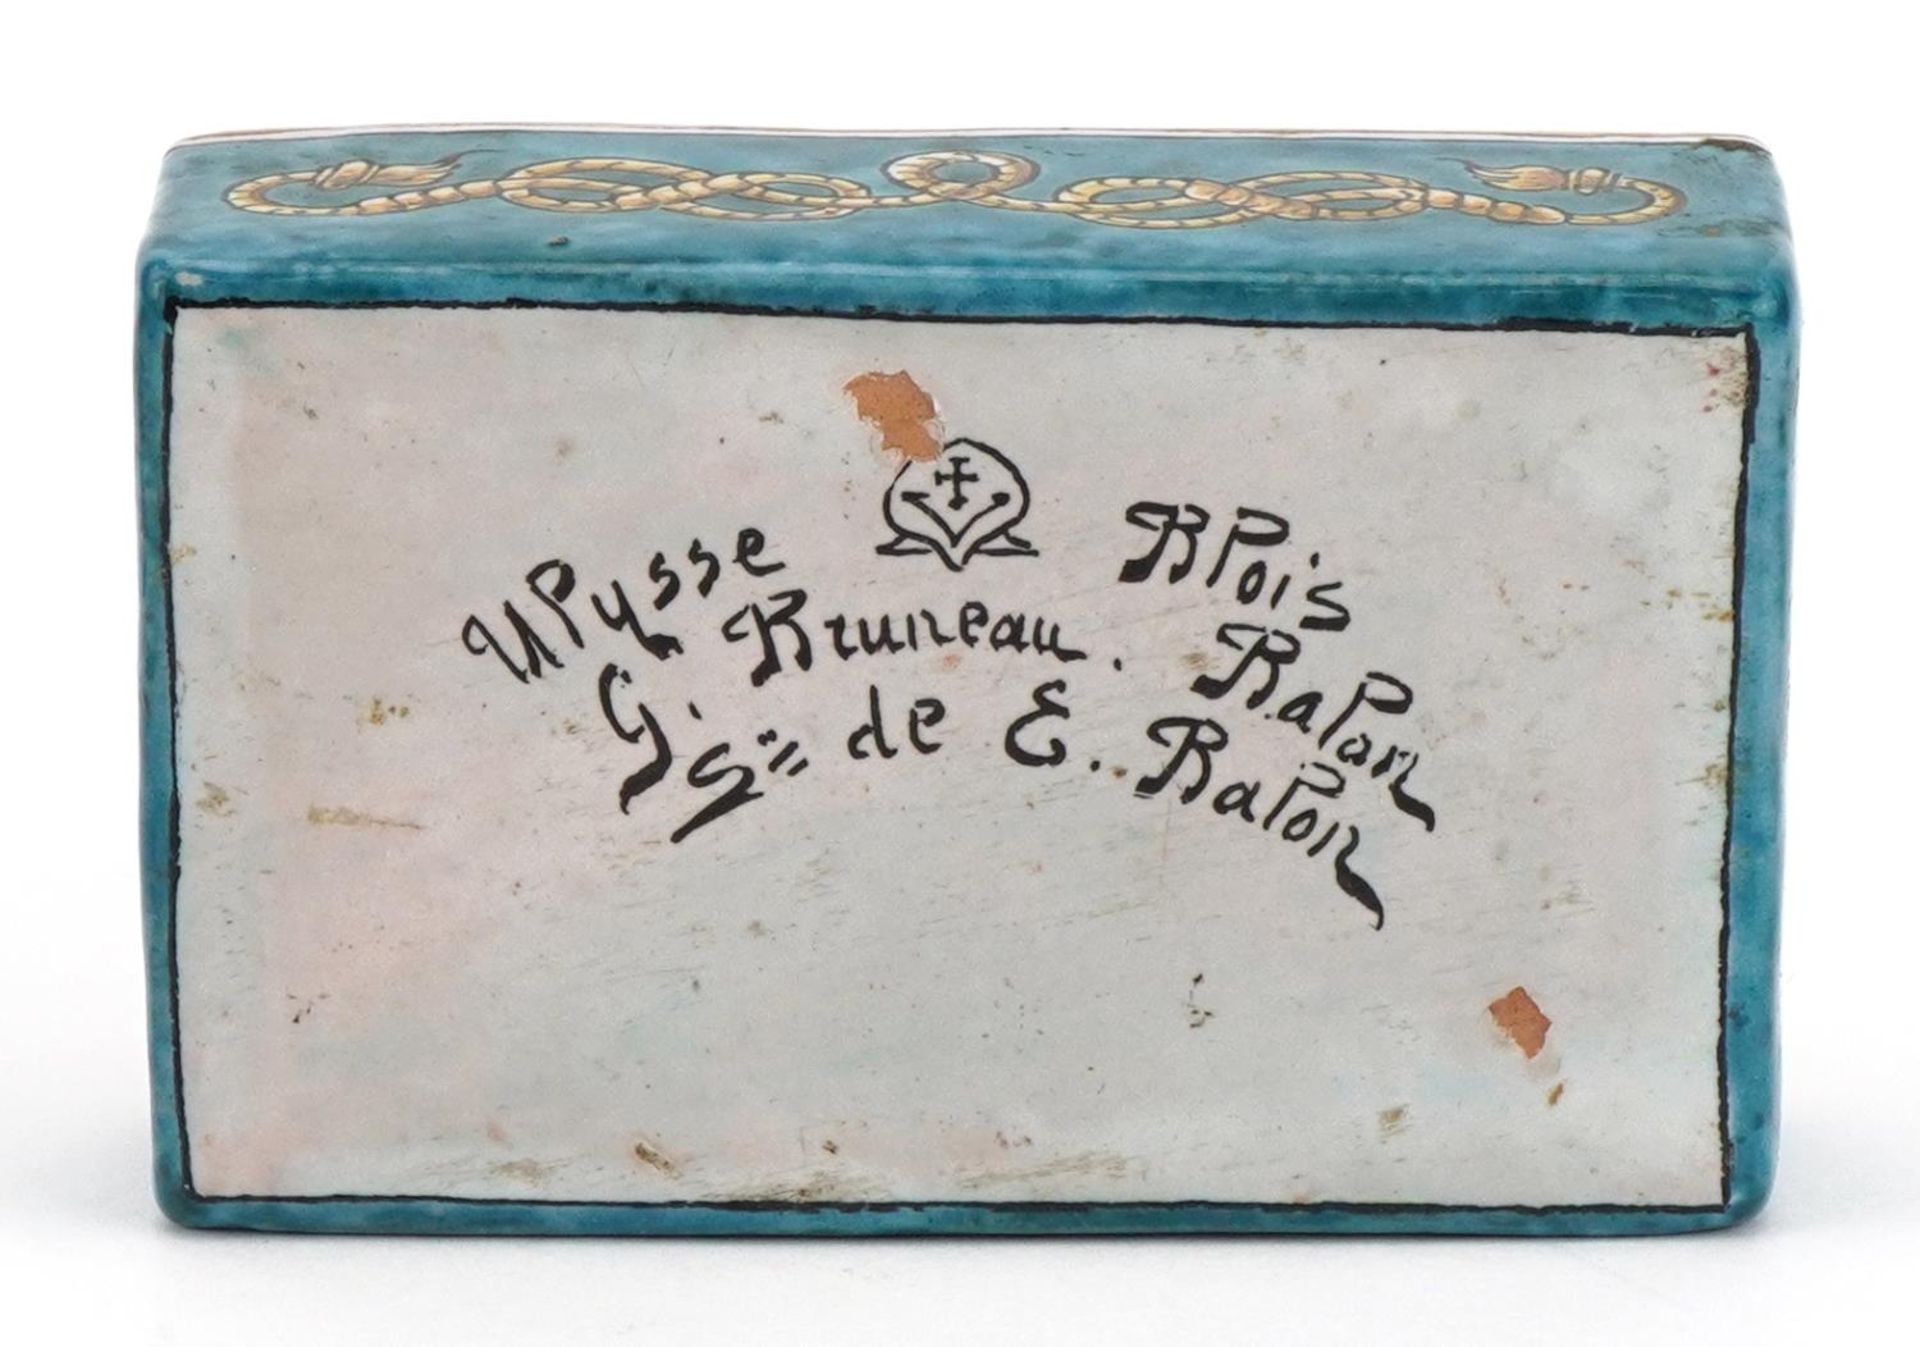 Ulysse Blois, 19th century French faience glazed pottery box and cover hand painted with fleur de - Image 7 of 8